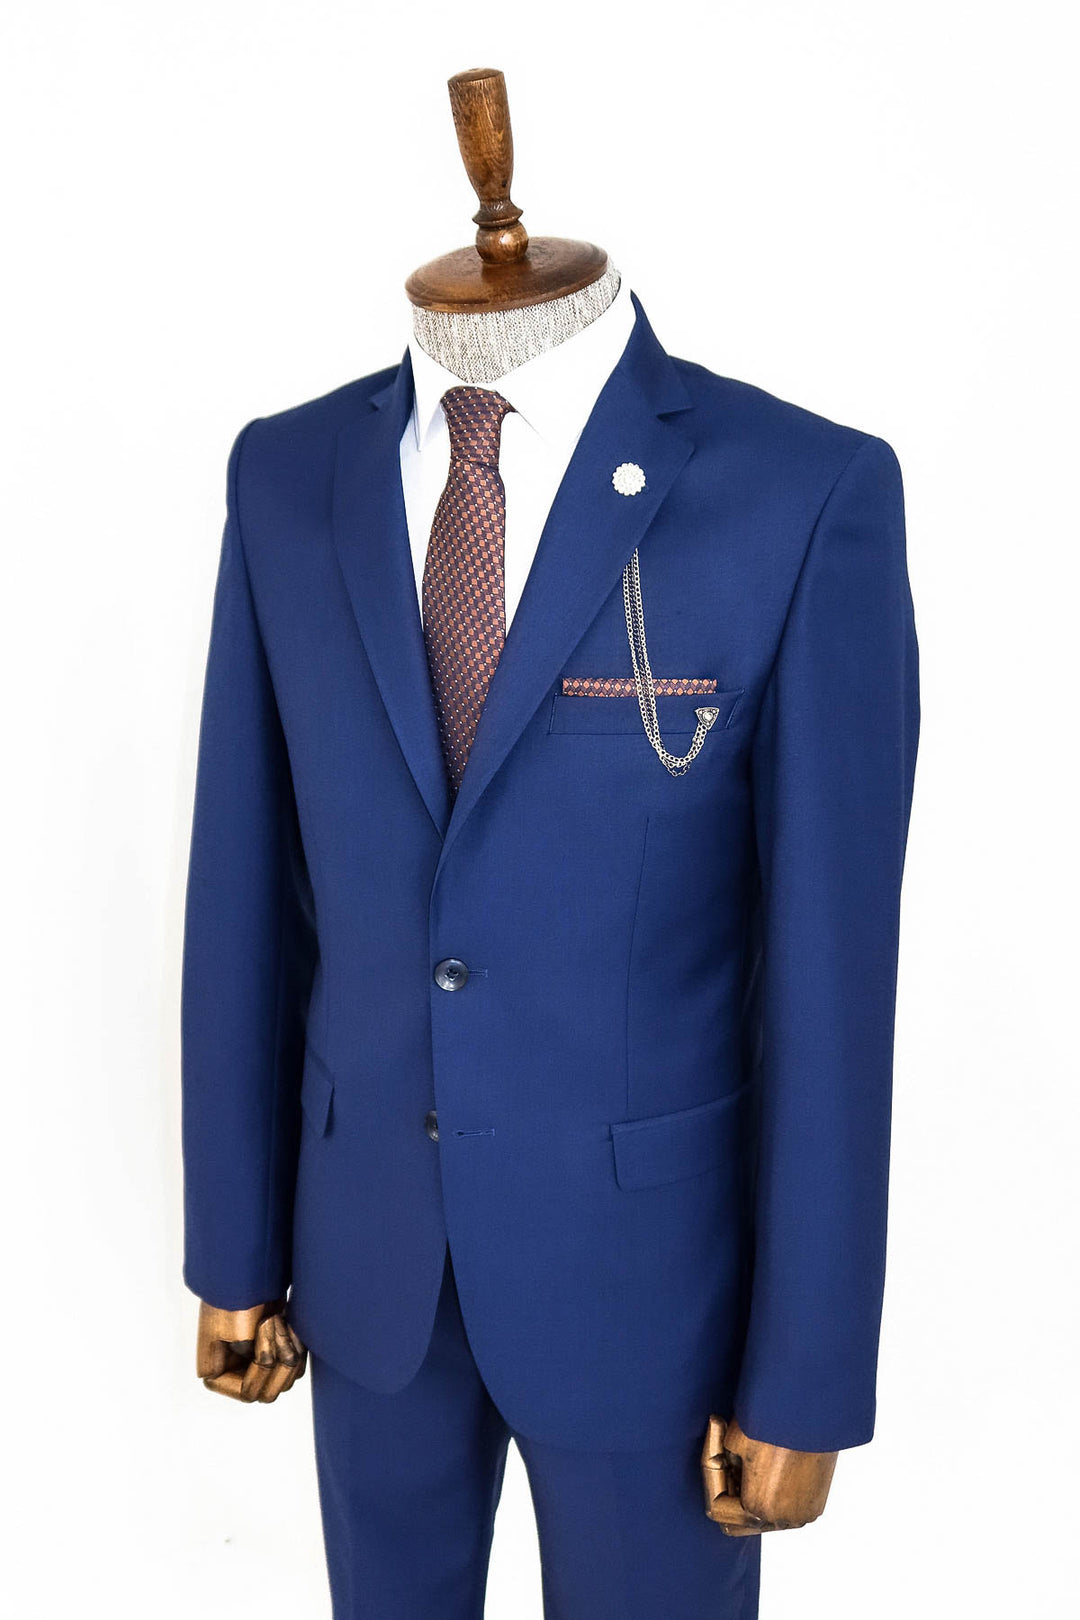 Two Buttons Two Piece Blue Men Suit - Wessi